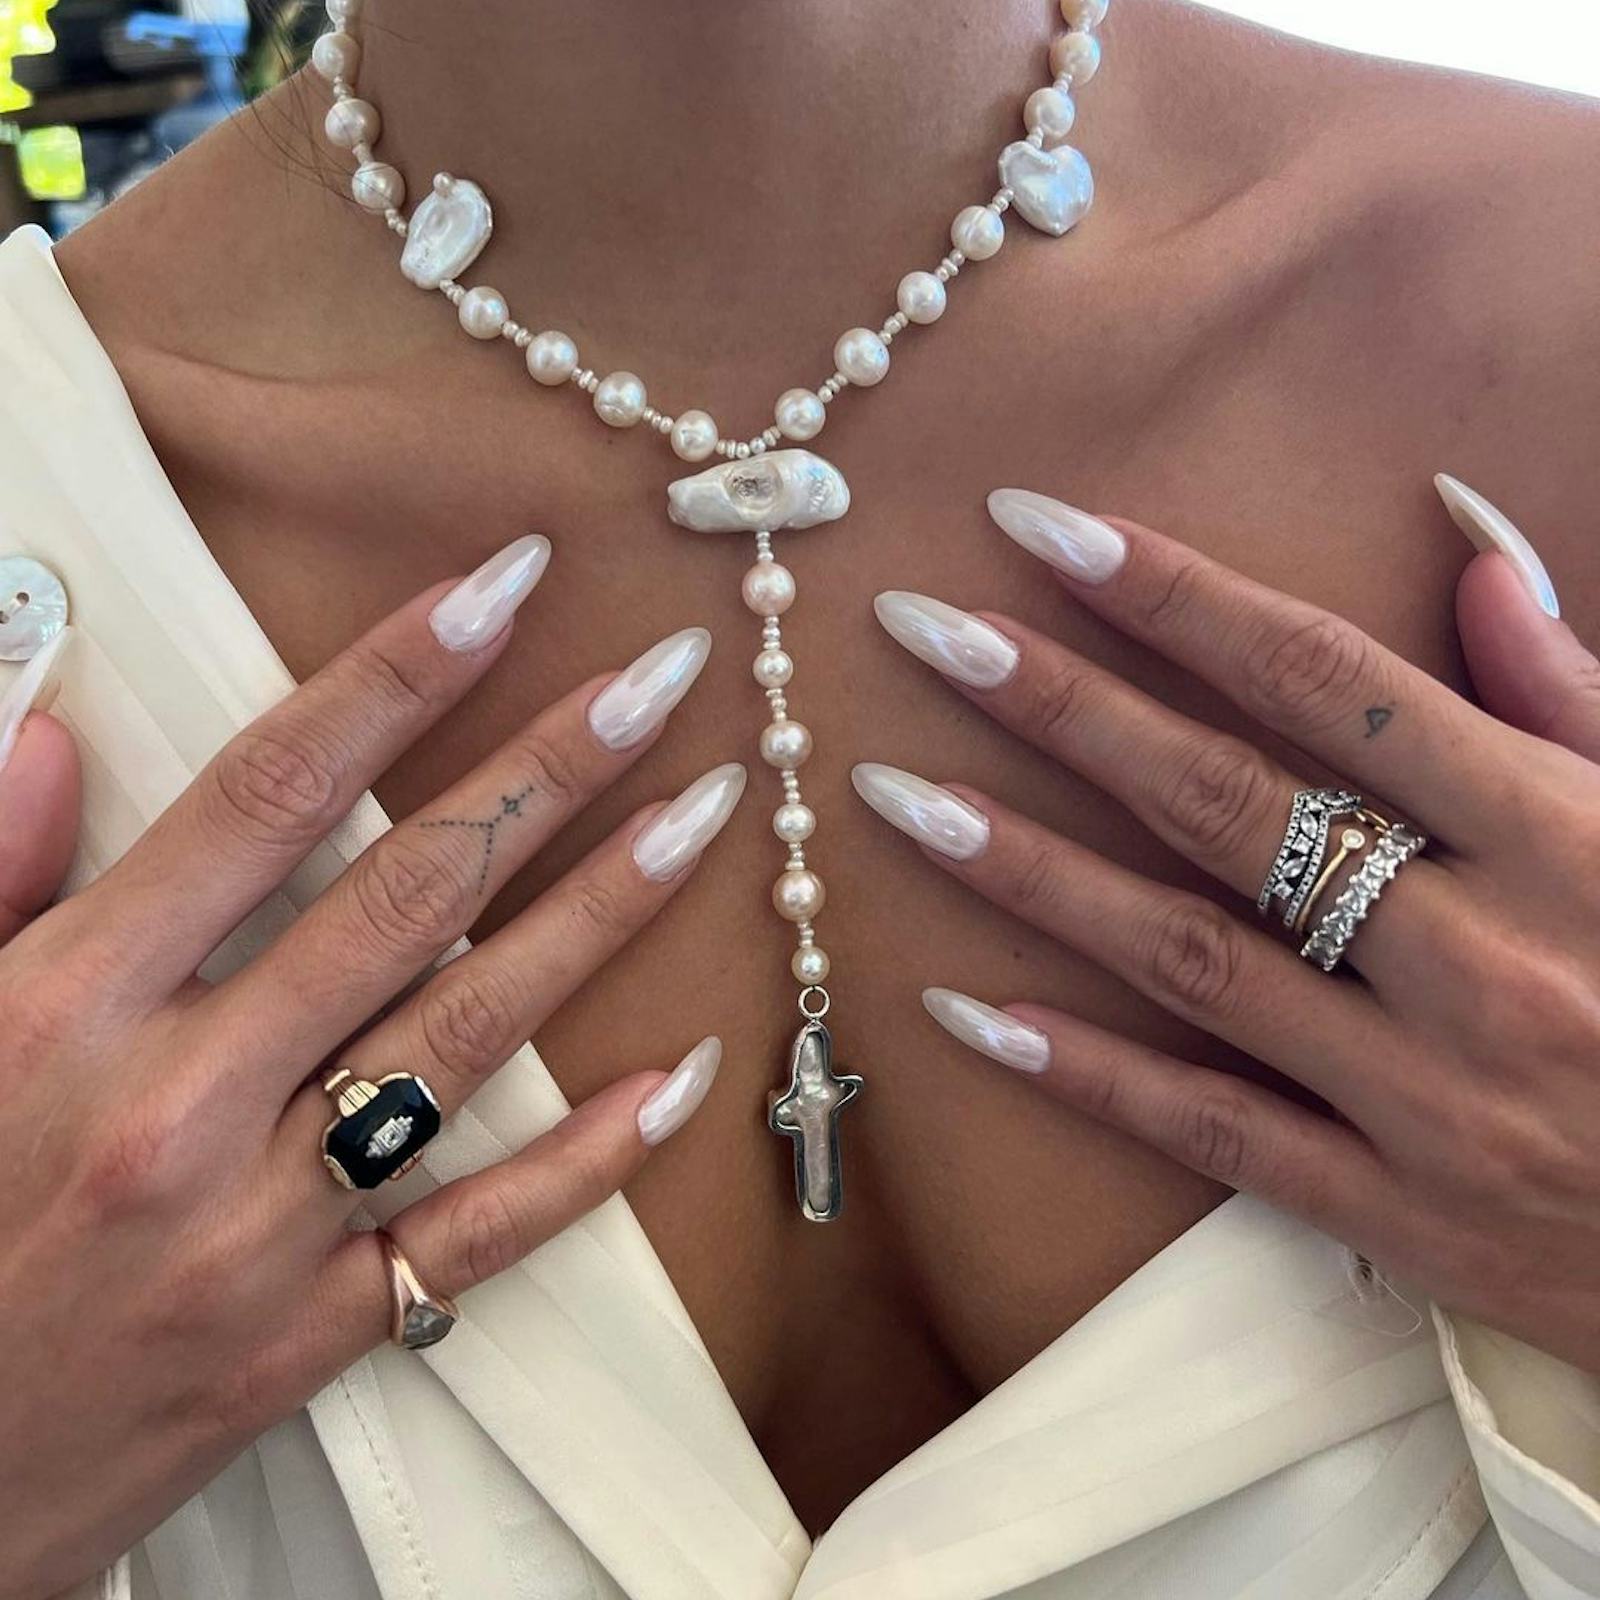 The 10 Best Wedding Nails For Summer Brides Are A Dream To Wear